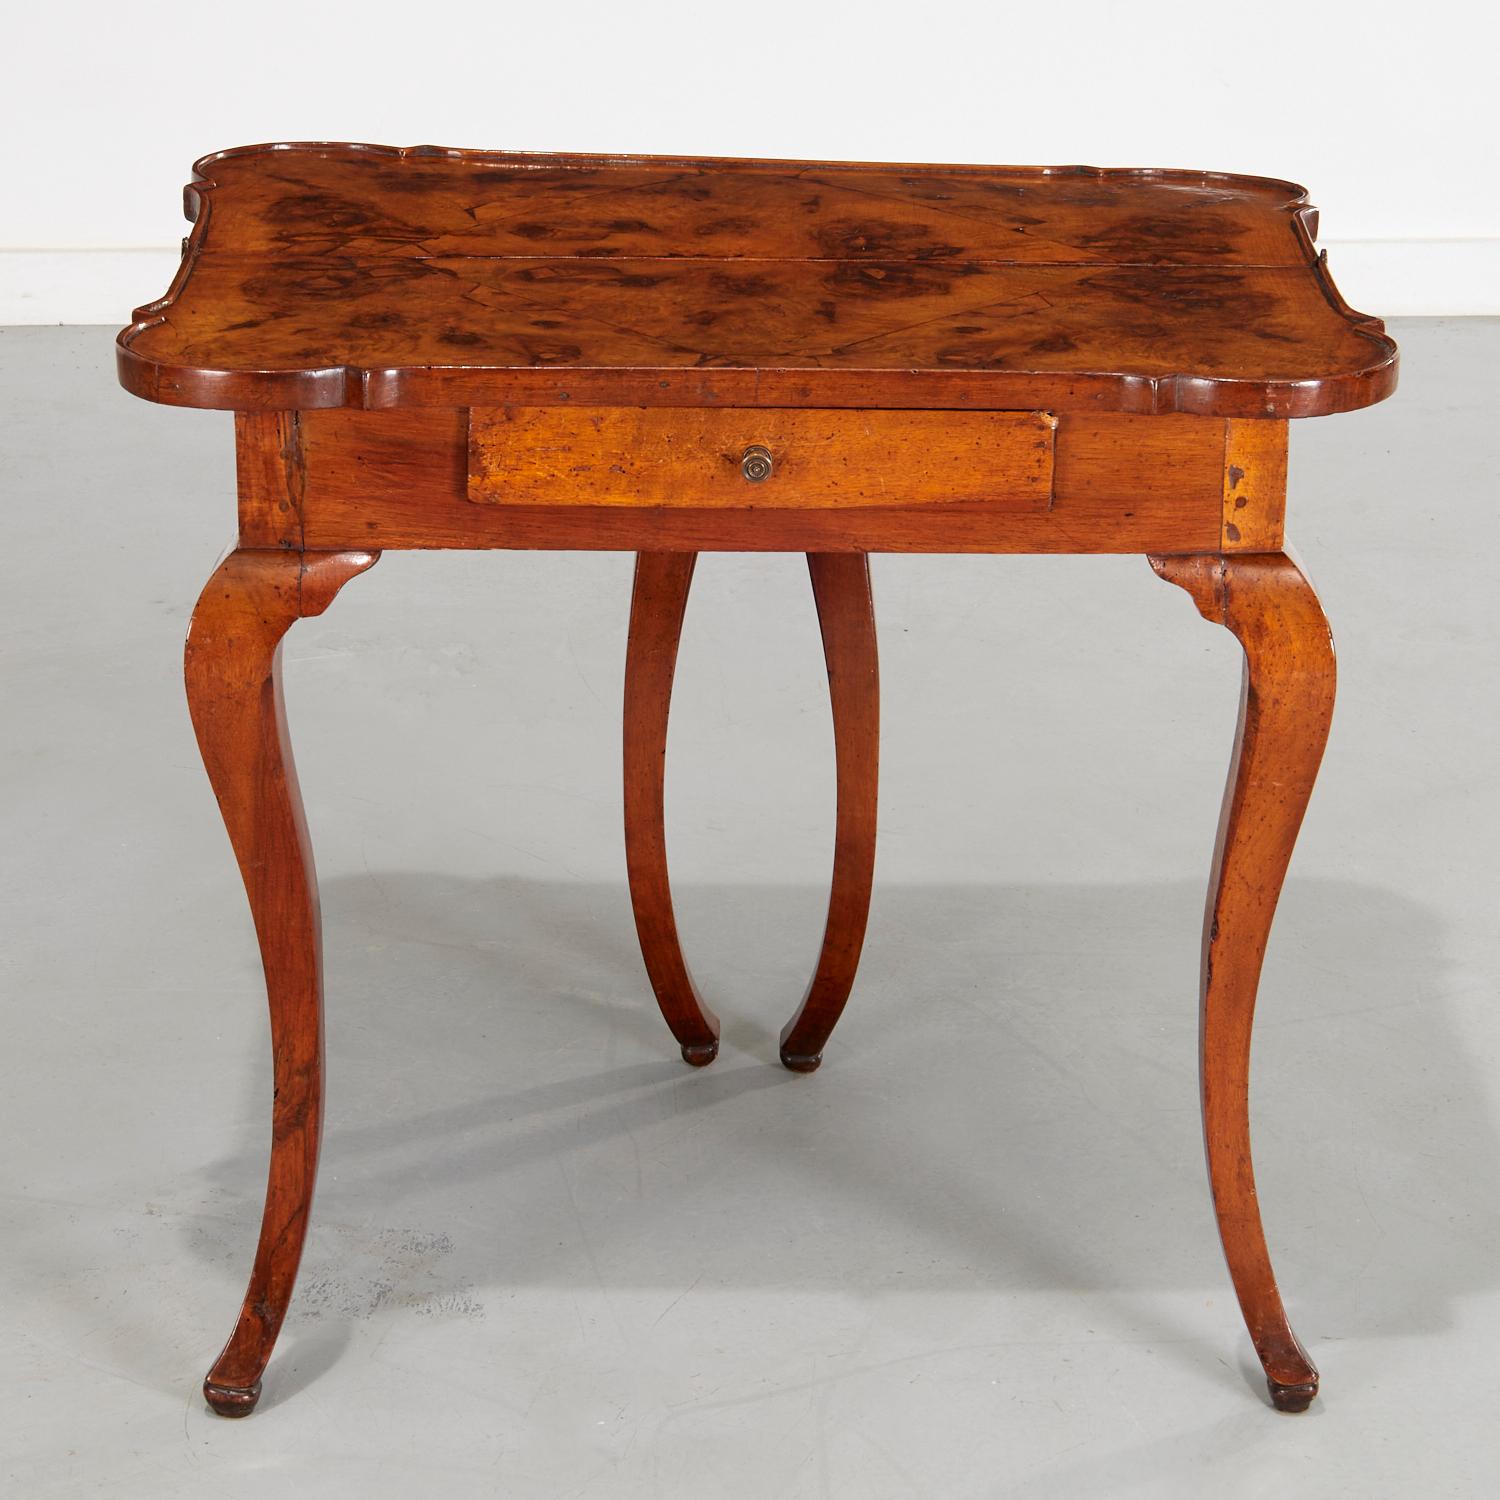 19th c., a rare Eastern European/Circassian games table with particularly fine color and wood graining. The shaped hinge top is over a single frieze drawer, raised on cabriole legs, and includes burled walnut bookmatched veneers on the open table